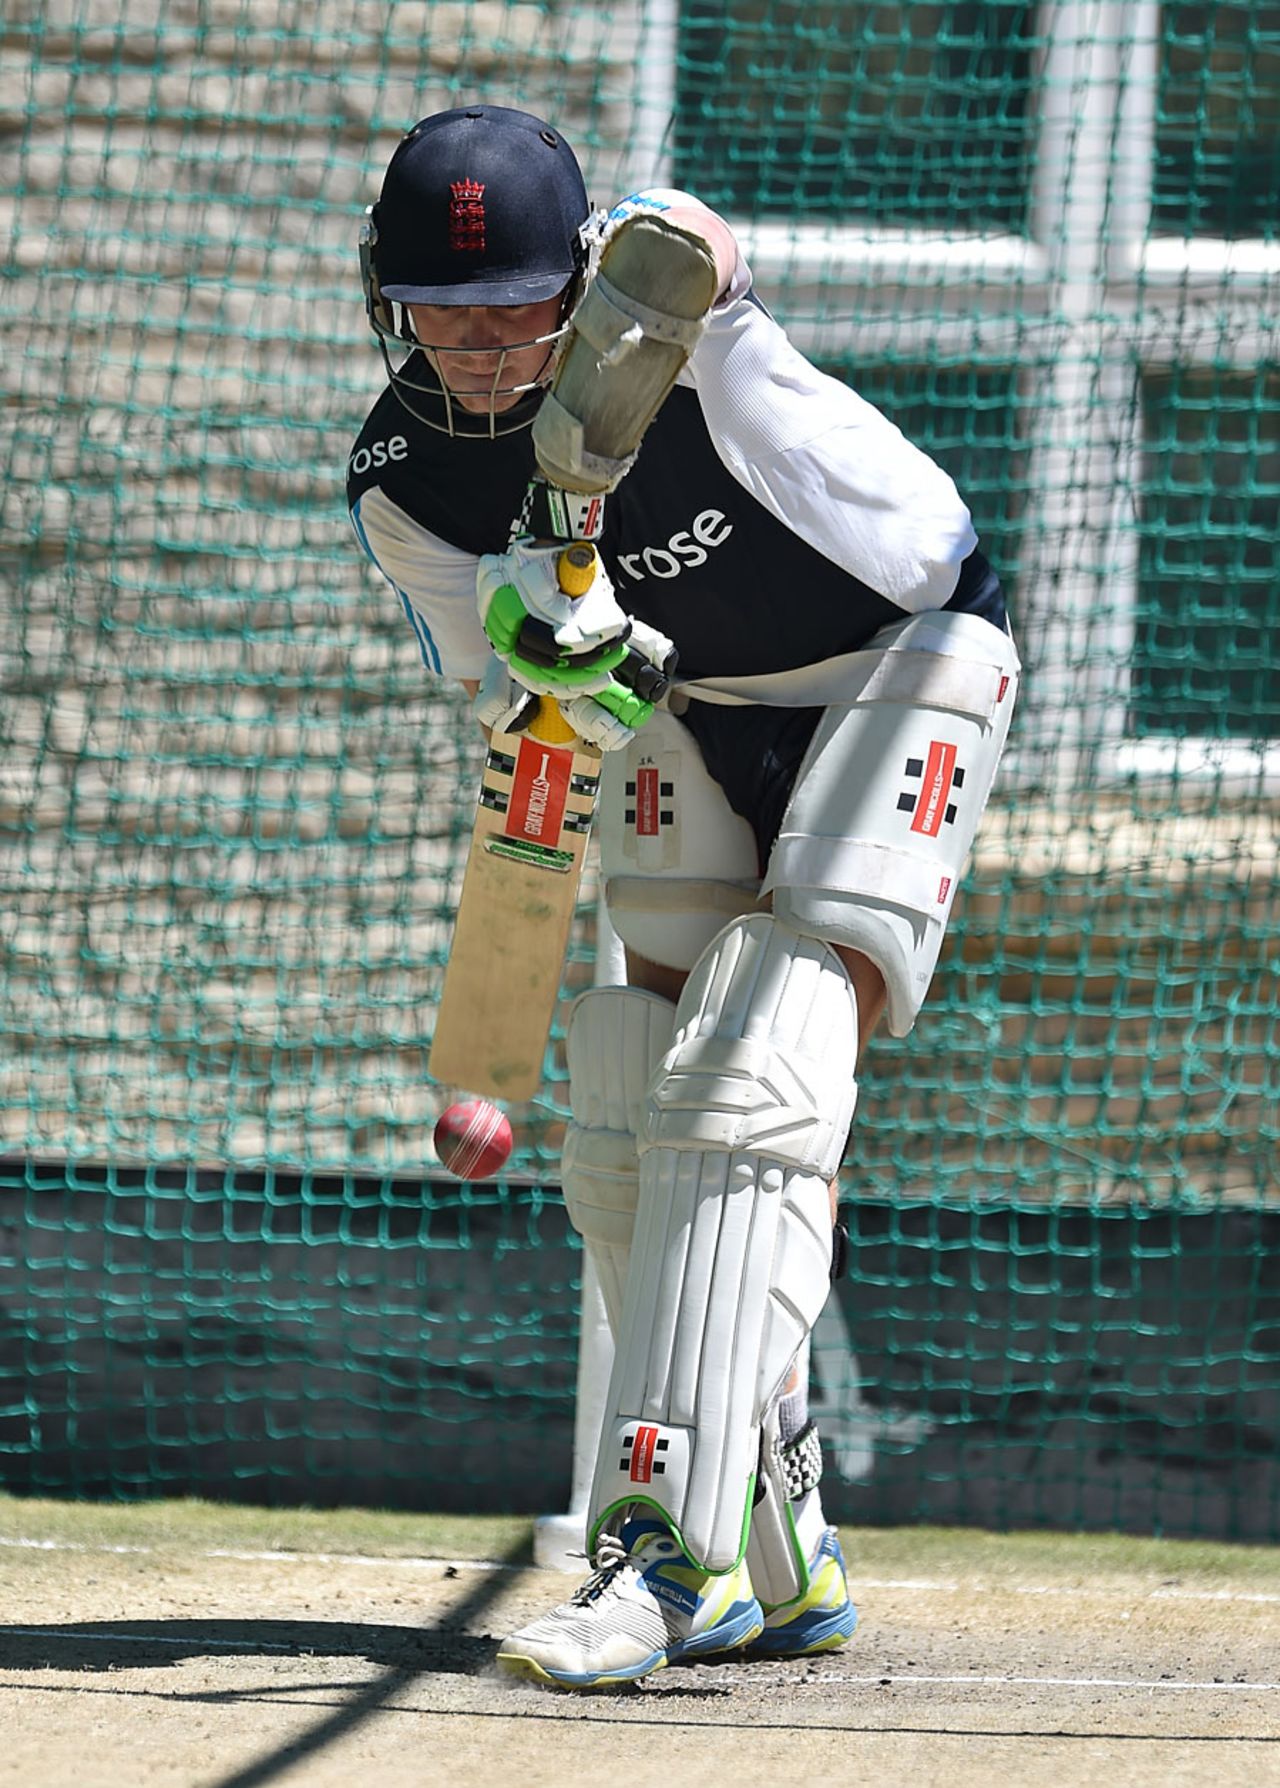 Sam Robson works in the nets, Bloemfontein, January 17, 2015